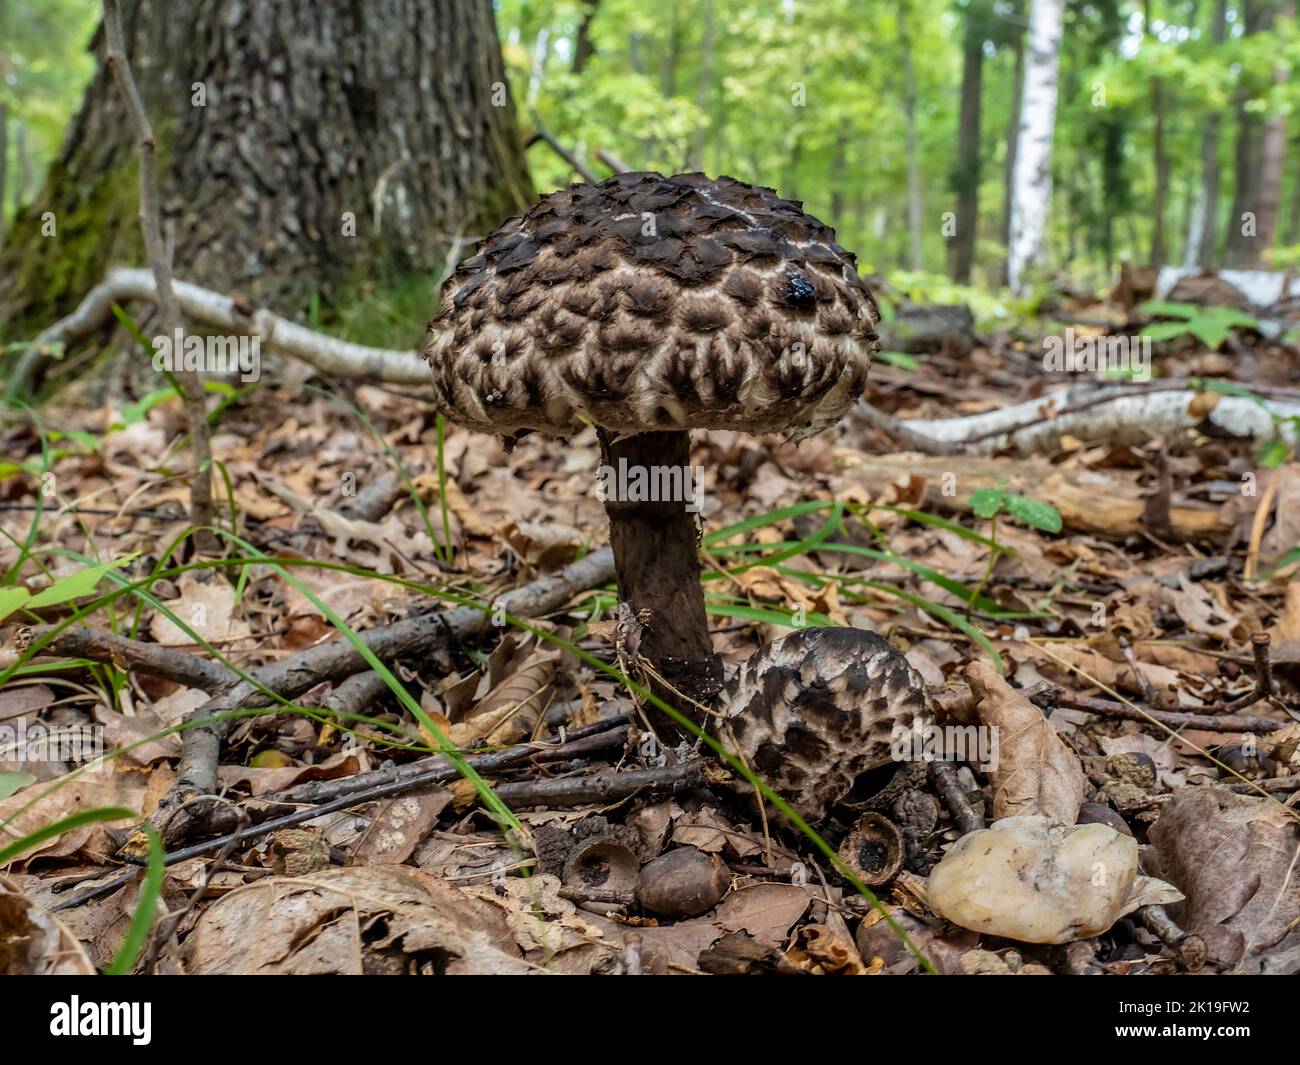 Detail view of a Old Man of the Woods Mushroom ( Strobilomyces Strobilaceus ), an edible mushroom found very rarely in deciduous forests. Stock Photo